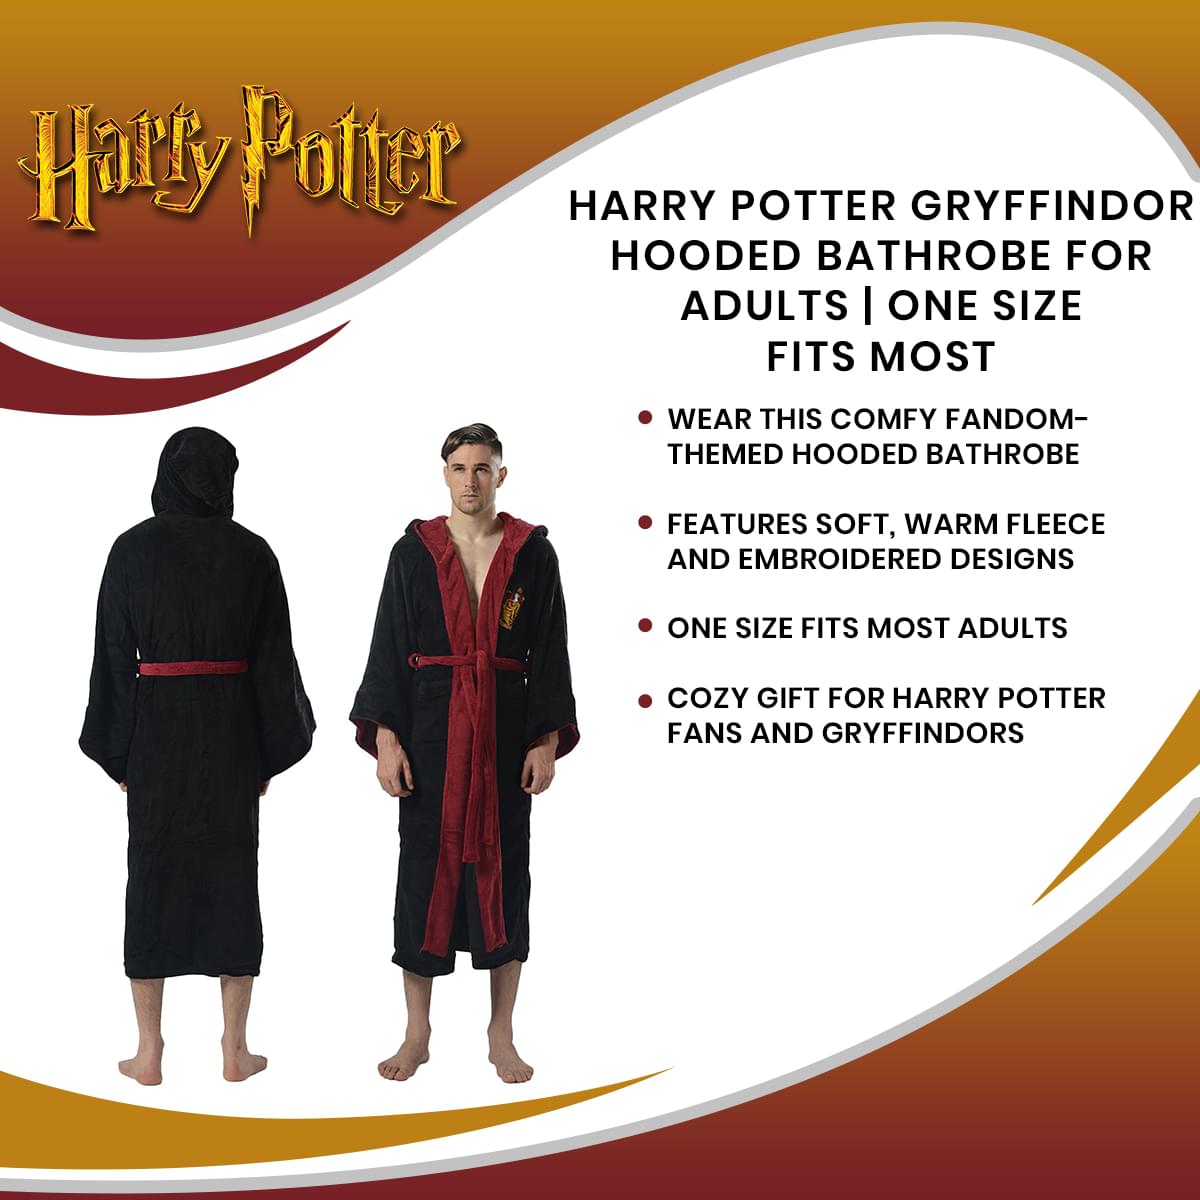 Harry Potter Gryffindor Hooded Bathrobe for Adults | One Size Fits Most